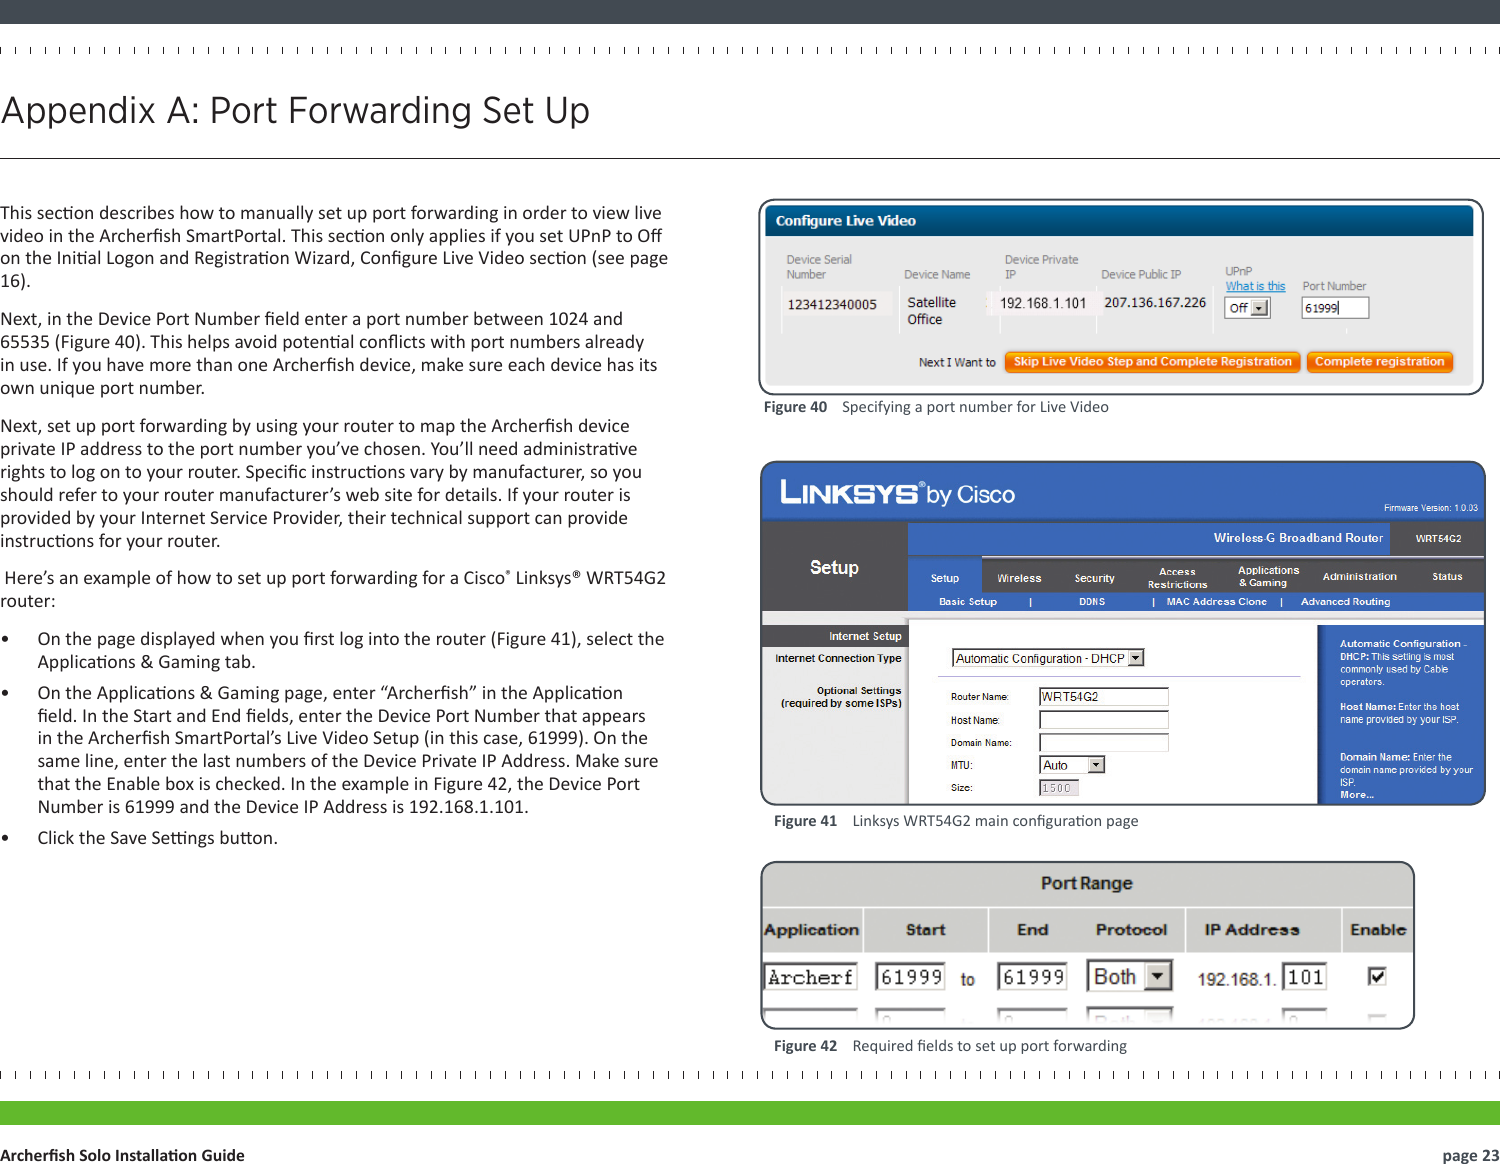 This secon describes how to manually set up port forwarding in order to view live video in the Archersh SmartPortal. This secon only applies if you set UPnP to O on the Inial Logon and Registraon Wizard, Congure Live Video secon (see page 16).Next, in the Device Port Number eld enter a port number between 1024 and 65535 (Figure 40). This helps avoid potenal conicts with port numbers already in use. If you have more than one Archersh device, make sure each device has its own unique port number.Next, set up port forwarding by using your router to map the Archersh device private IP address to the port number you’ve chosen. You’ll need administrave rights to log on to your router. Specic instrucons vary by manufacturer, so you should refer to your router manufacturer’s web site for details. If your router is provided by your Internet Service Provider, their technical support can provide instrucons for your router. Here’s an example of how to set up port forwarding for a Cisco® Linksys® WRT54G2 router: •  On the page displayed when you rst log into the router (Figure 41), select the Applicaons &amp; Gaming tab.•  On the Applicaons &amp; Gaming page, enter “Archersh” in the Applicaon eld. In the Start and End elds, enter the Device Port Number that appears in the Archersh SmartPortal’s Live Video Setup (in this case, 61999). On the same line, enter the last numbers of the Device Private IP Address. Make sure that the Enable box is checked. In the example in Figure 42, the Device Port Number is 61999 and the Device IP Address is 192.168.1.101.•  Click the Save Sengs buon.page 23Archersh Solo Installaon GuideAppendix A: Port Forwarding Set UpFigure 41    Linksys WRT54G2 main conguraon pageFigure 42    Required elds to set up port forwardingFigure 40    Specifying a port number for Live Video